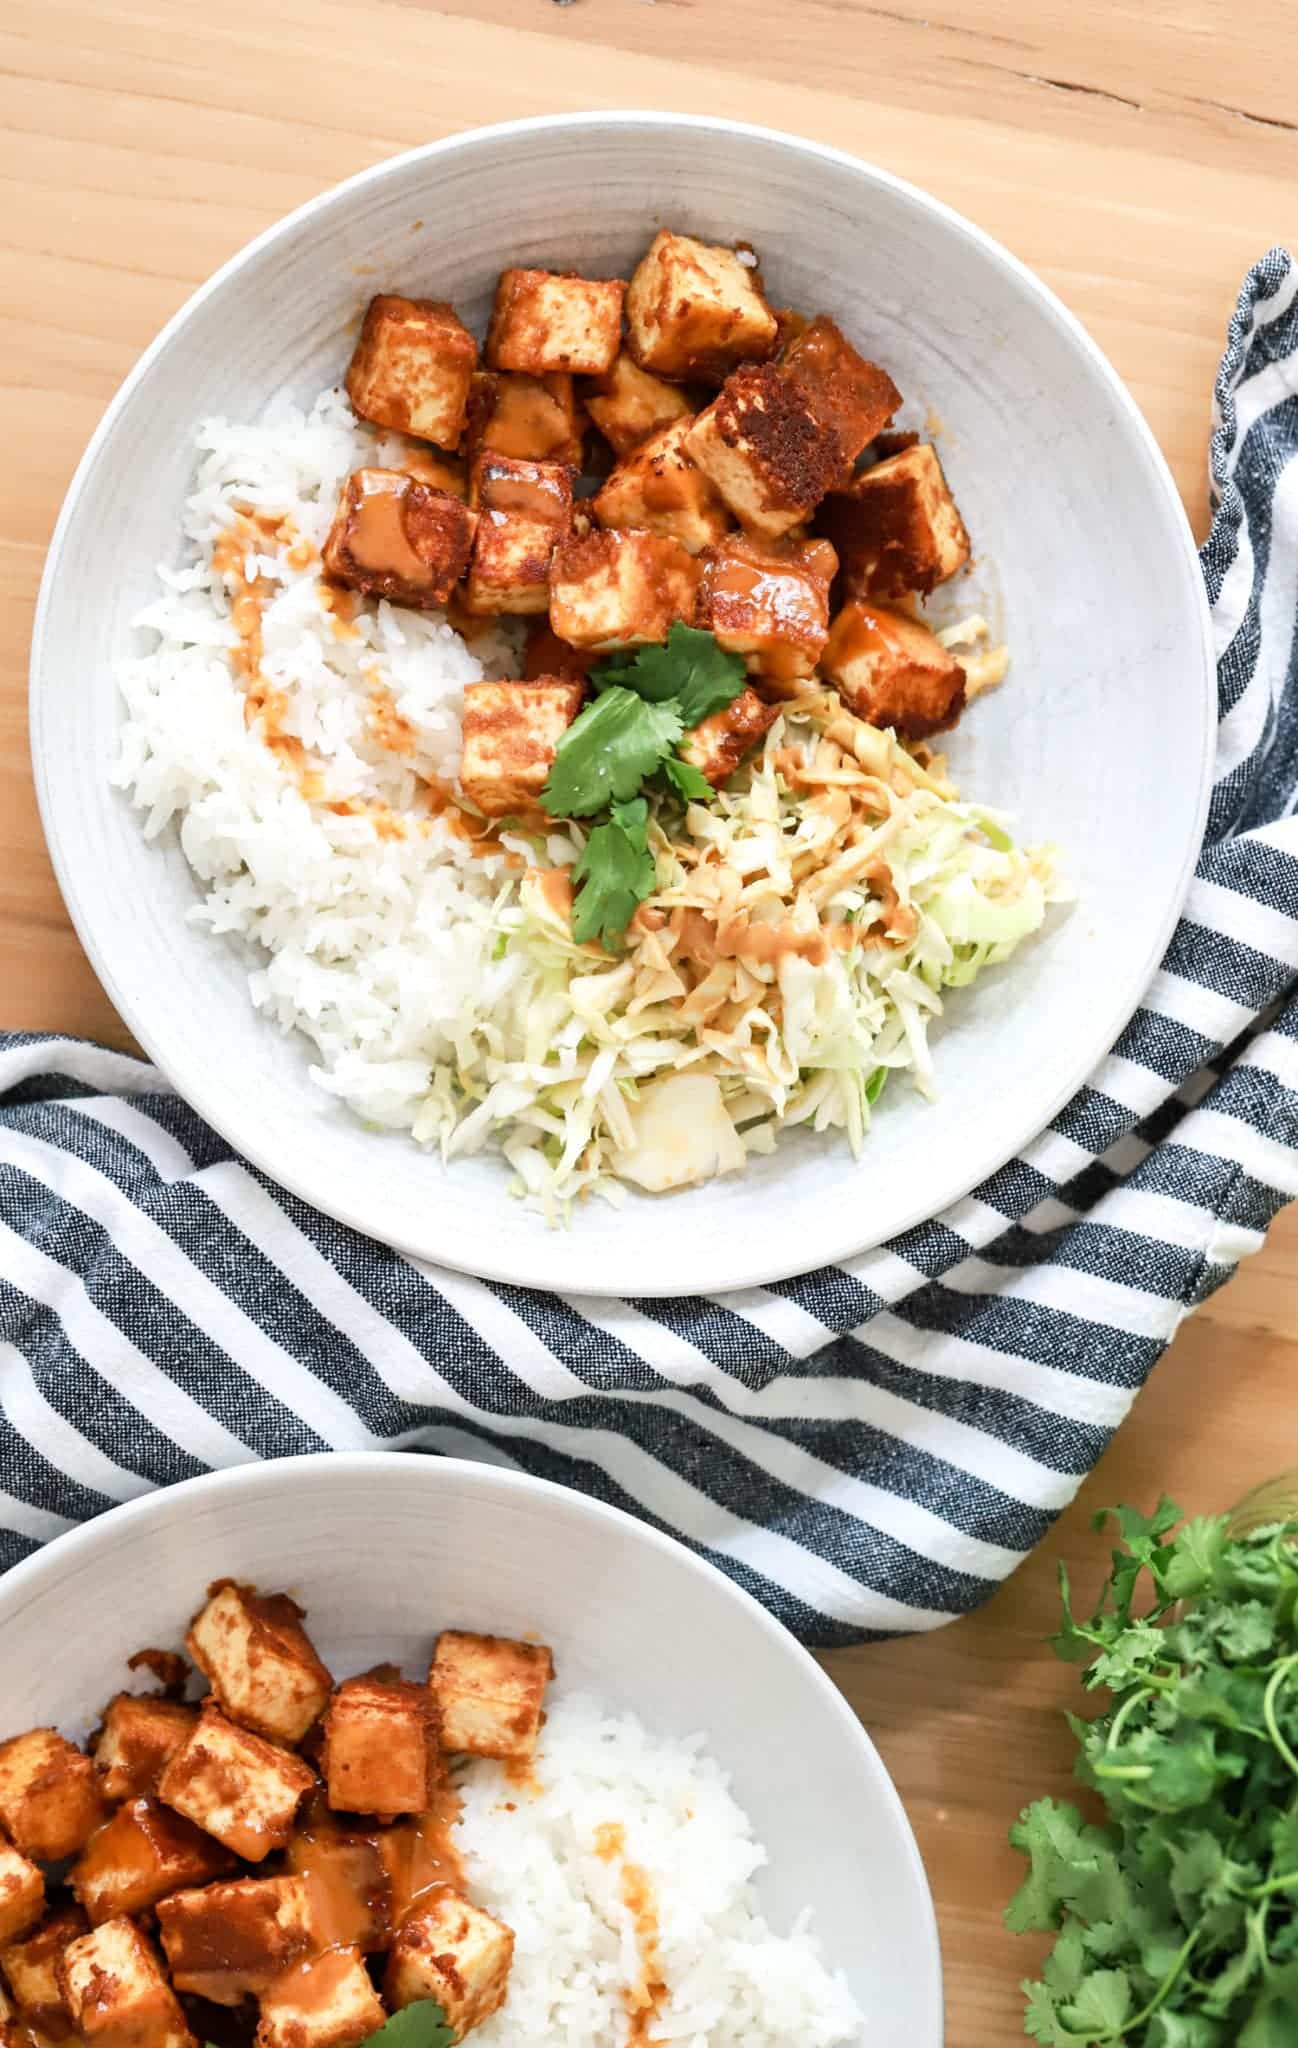 Two vegan bowls of tofu and rice on a wooden table.